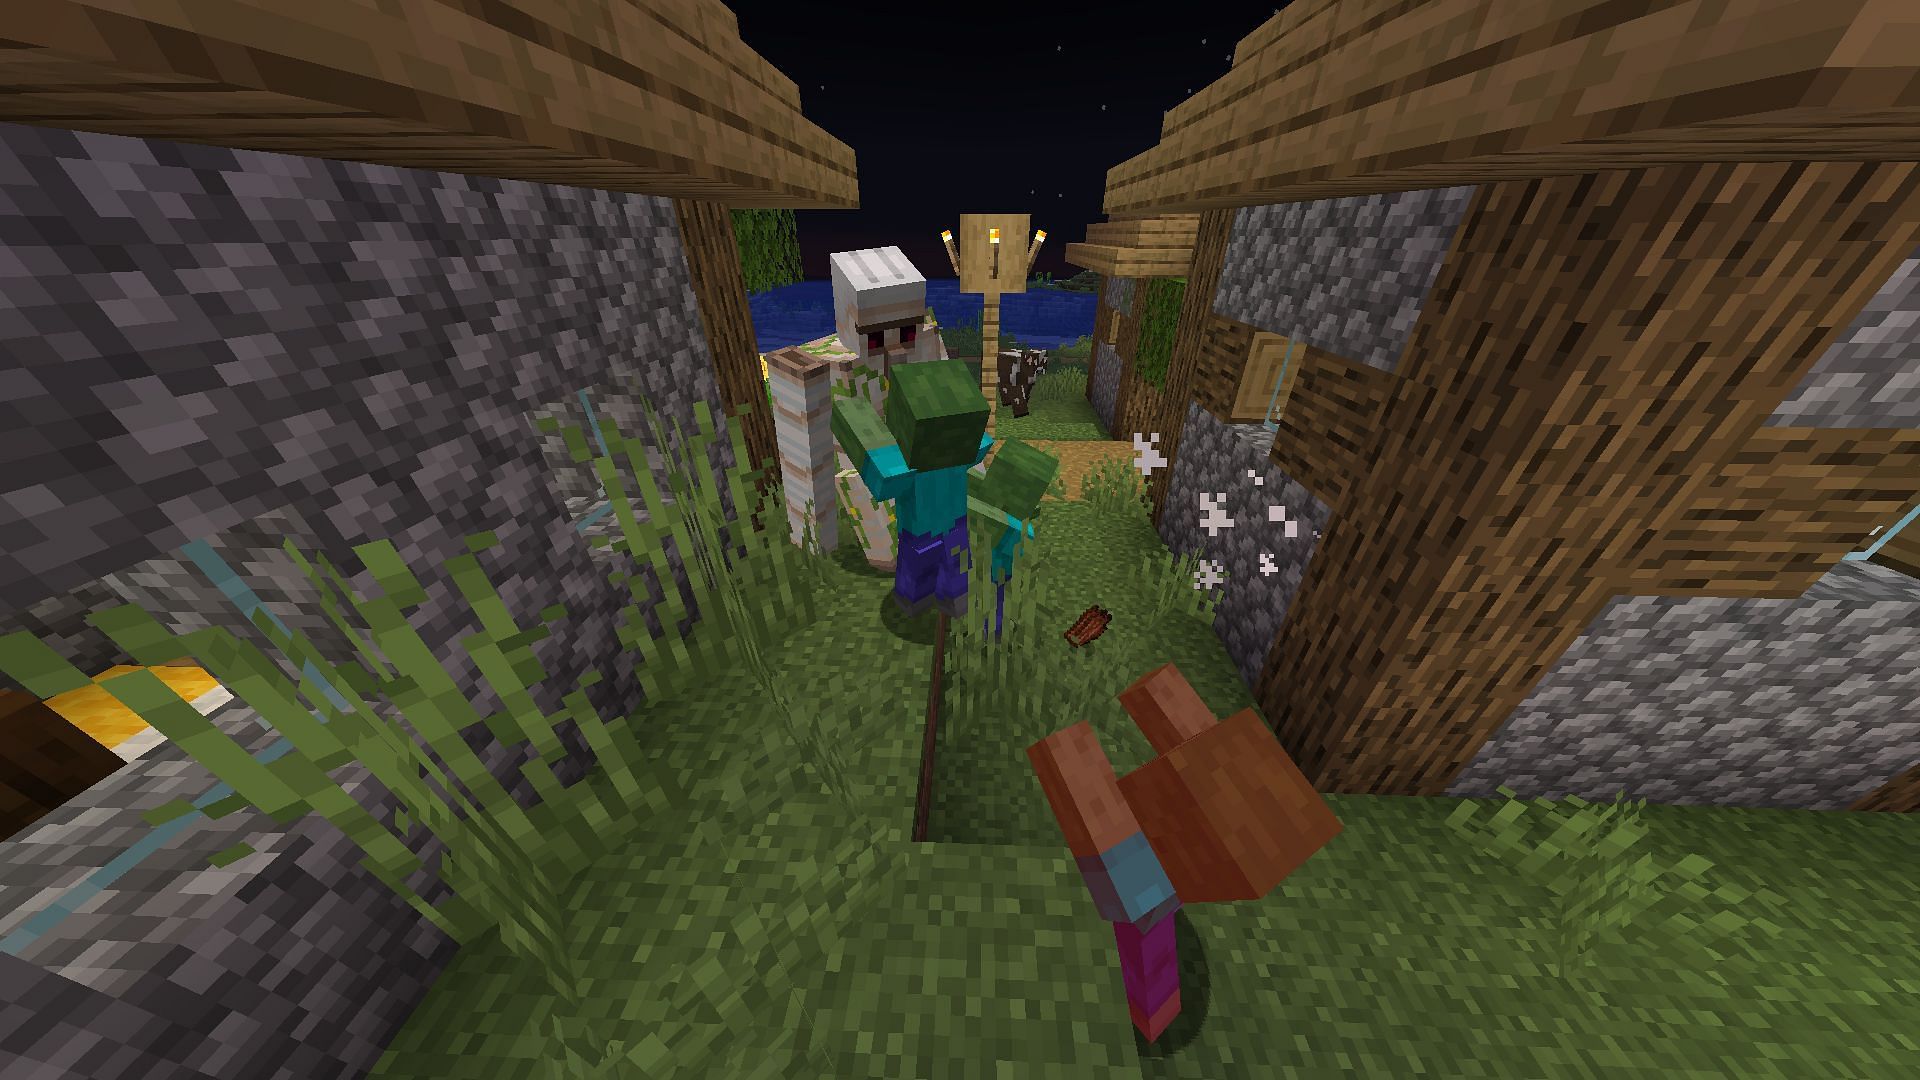 Killing hostile mobs is the most common method to get XP points in Minecraft (Image via Mojang)